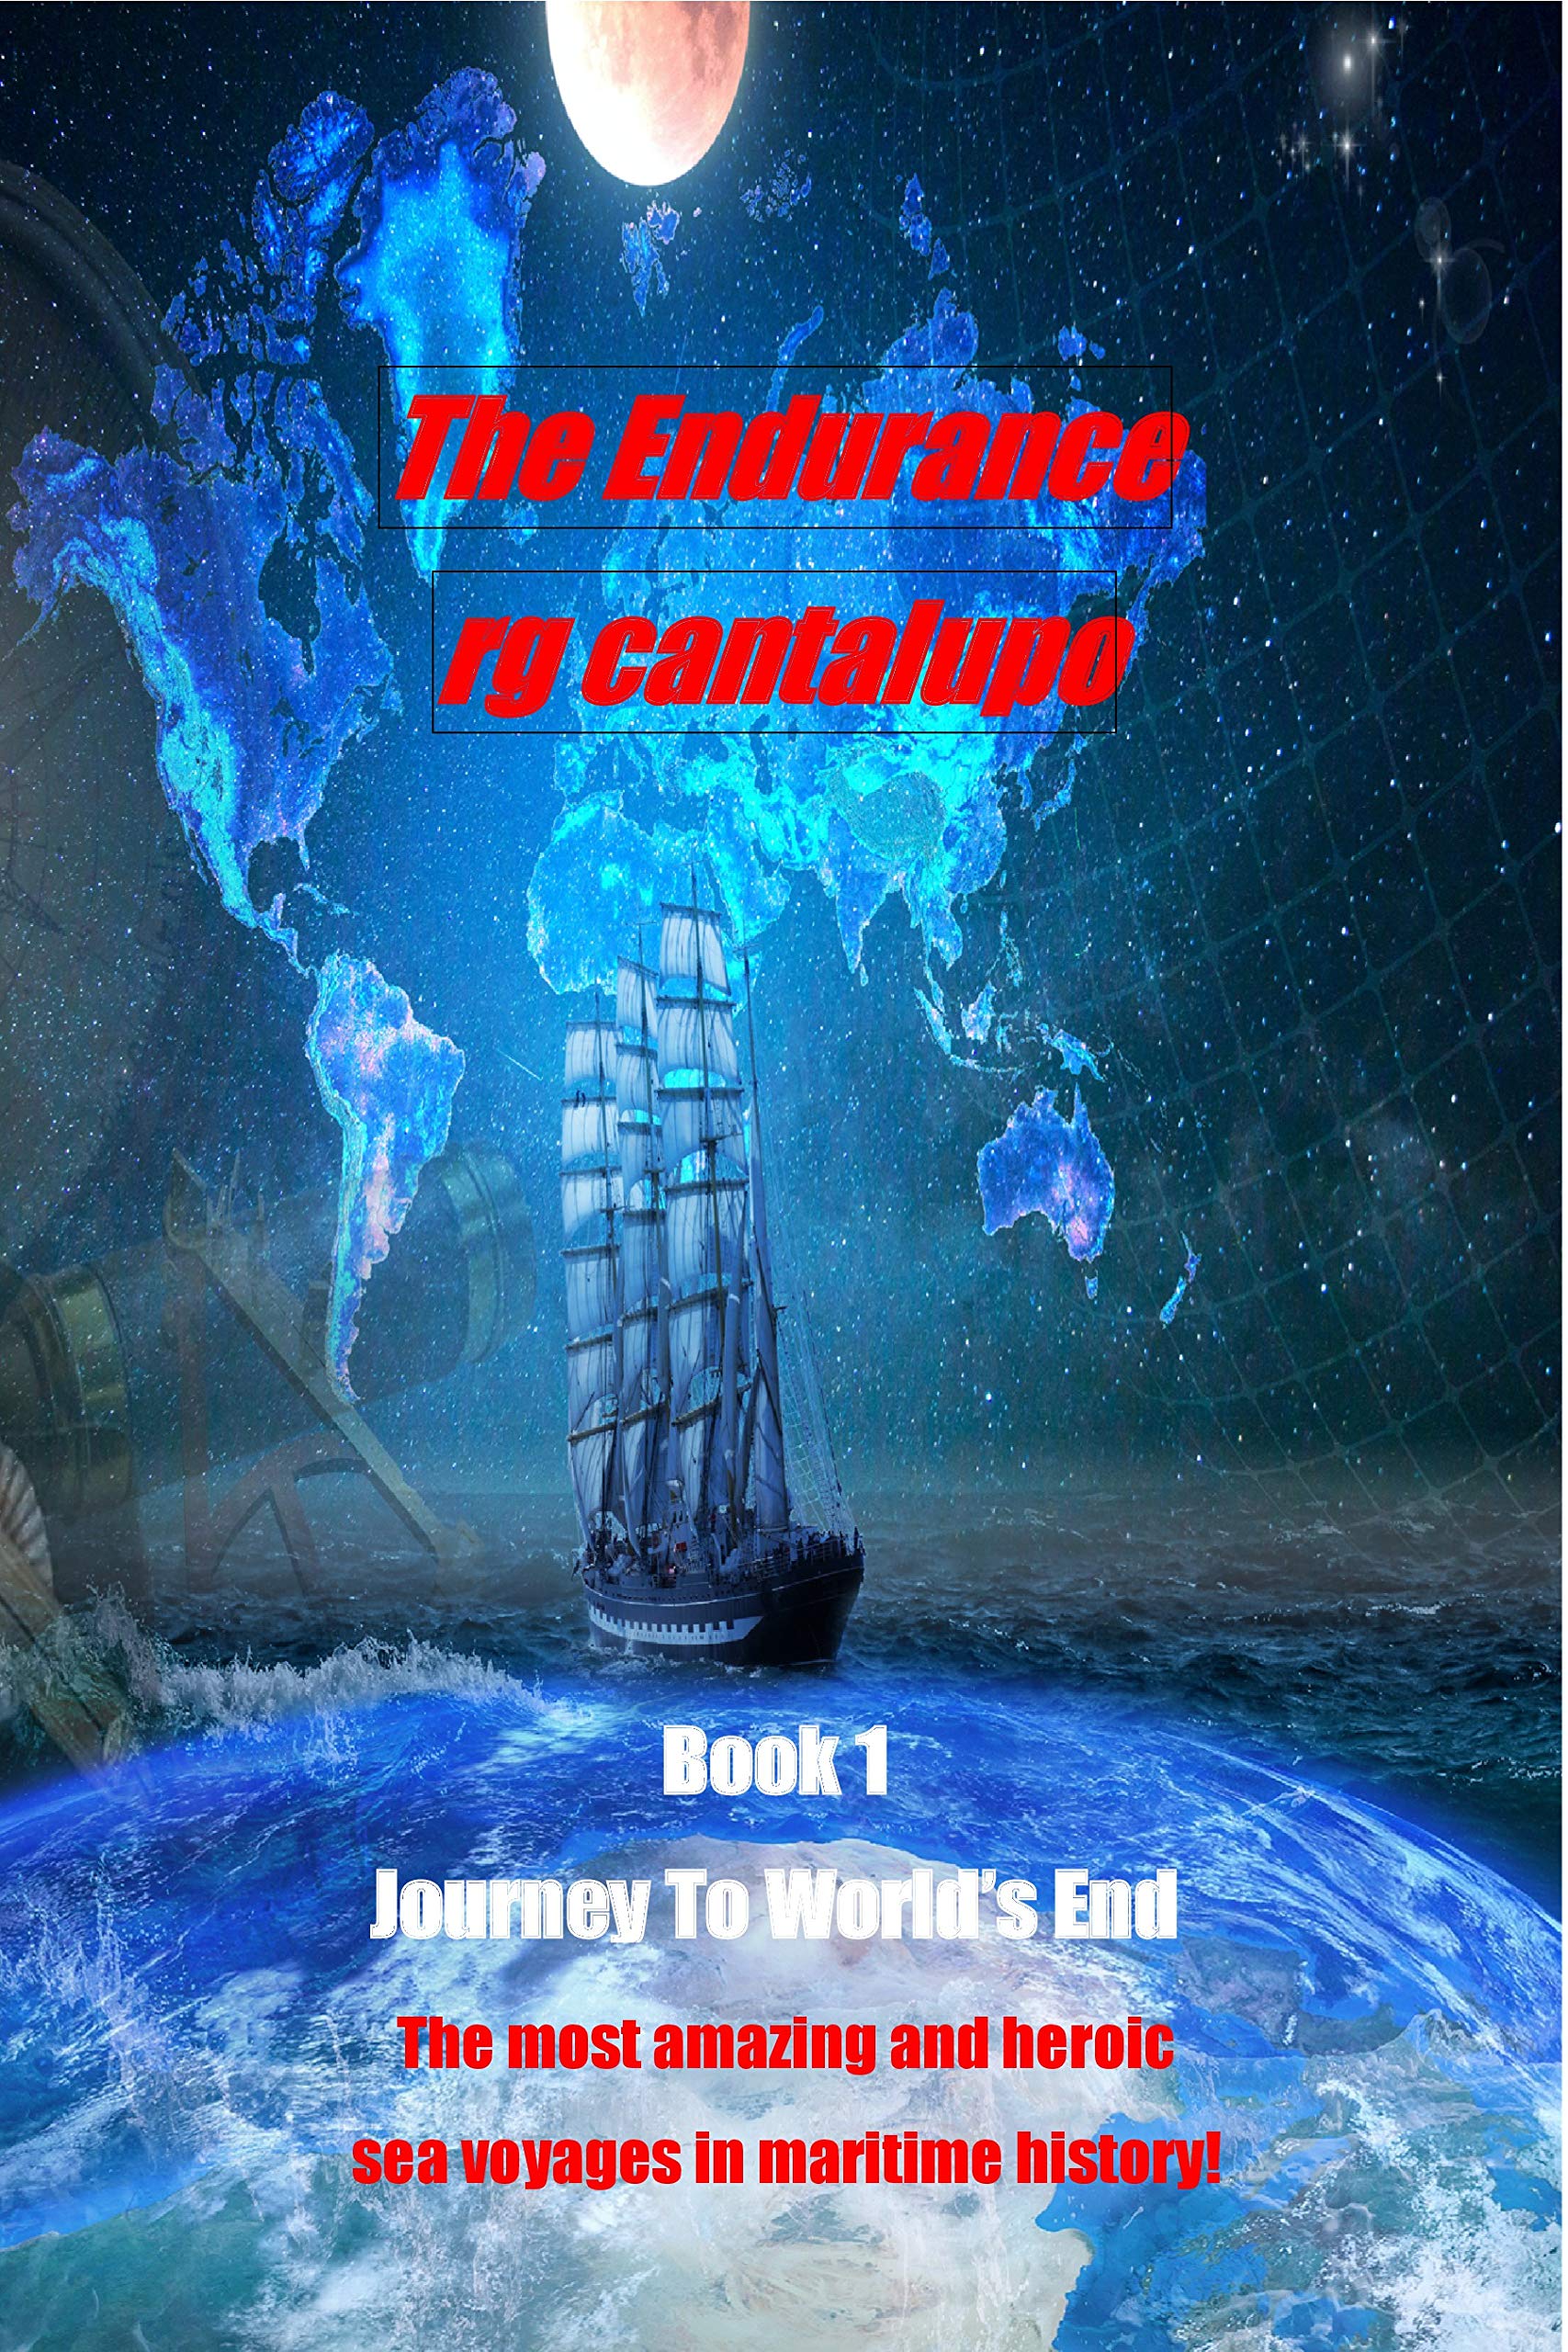 The Endurance : Journey To World's End